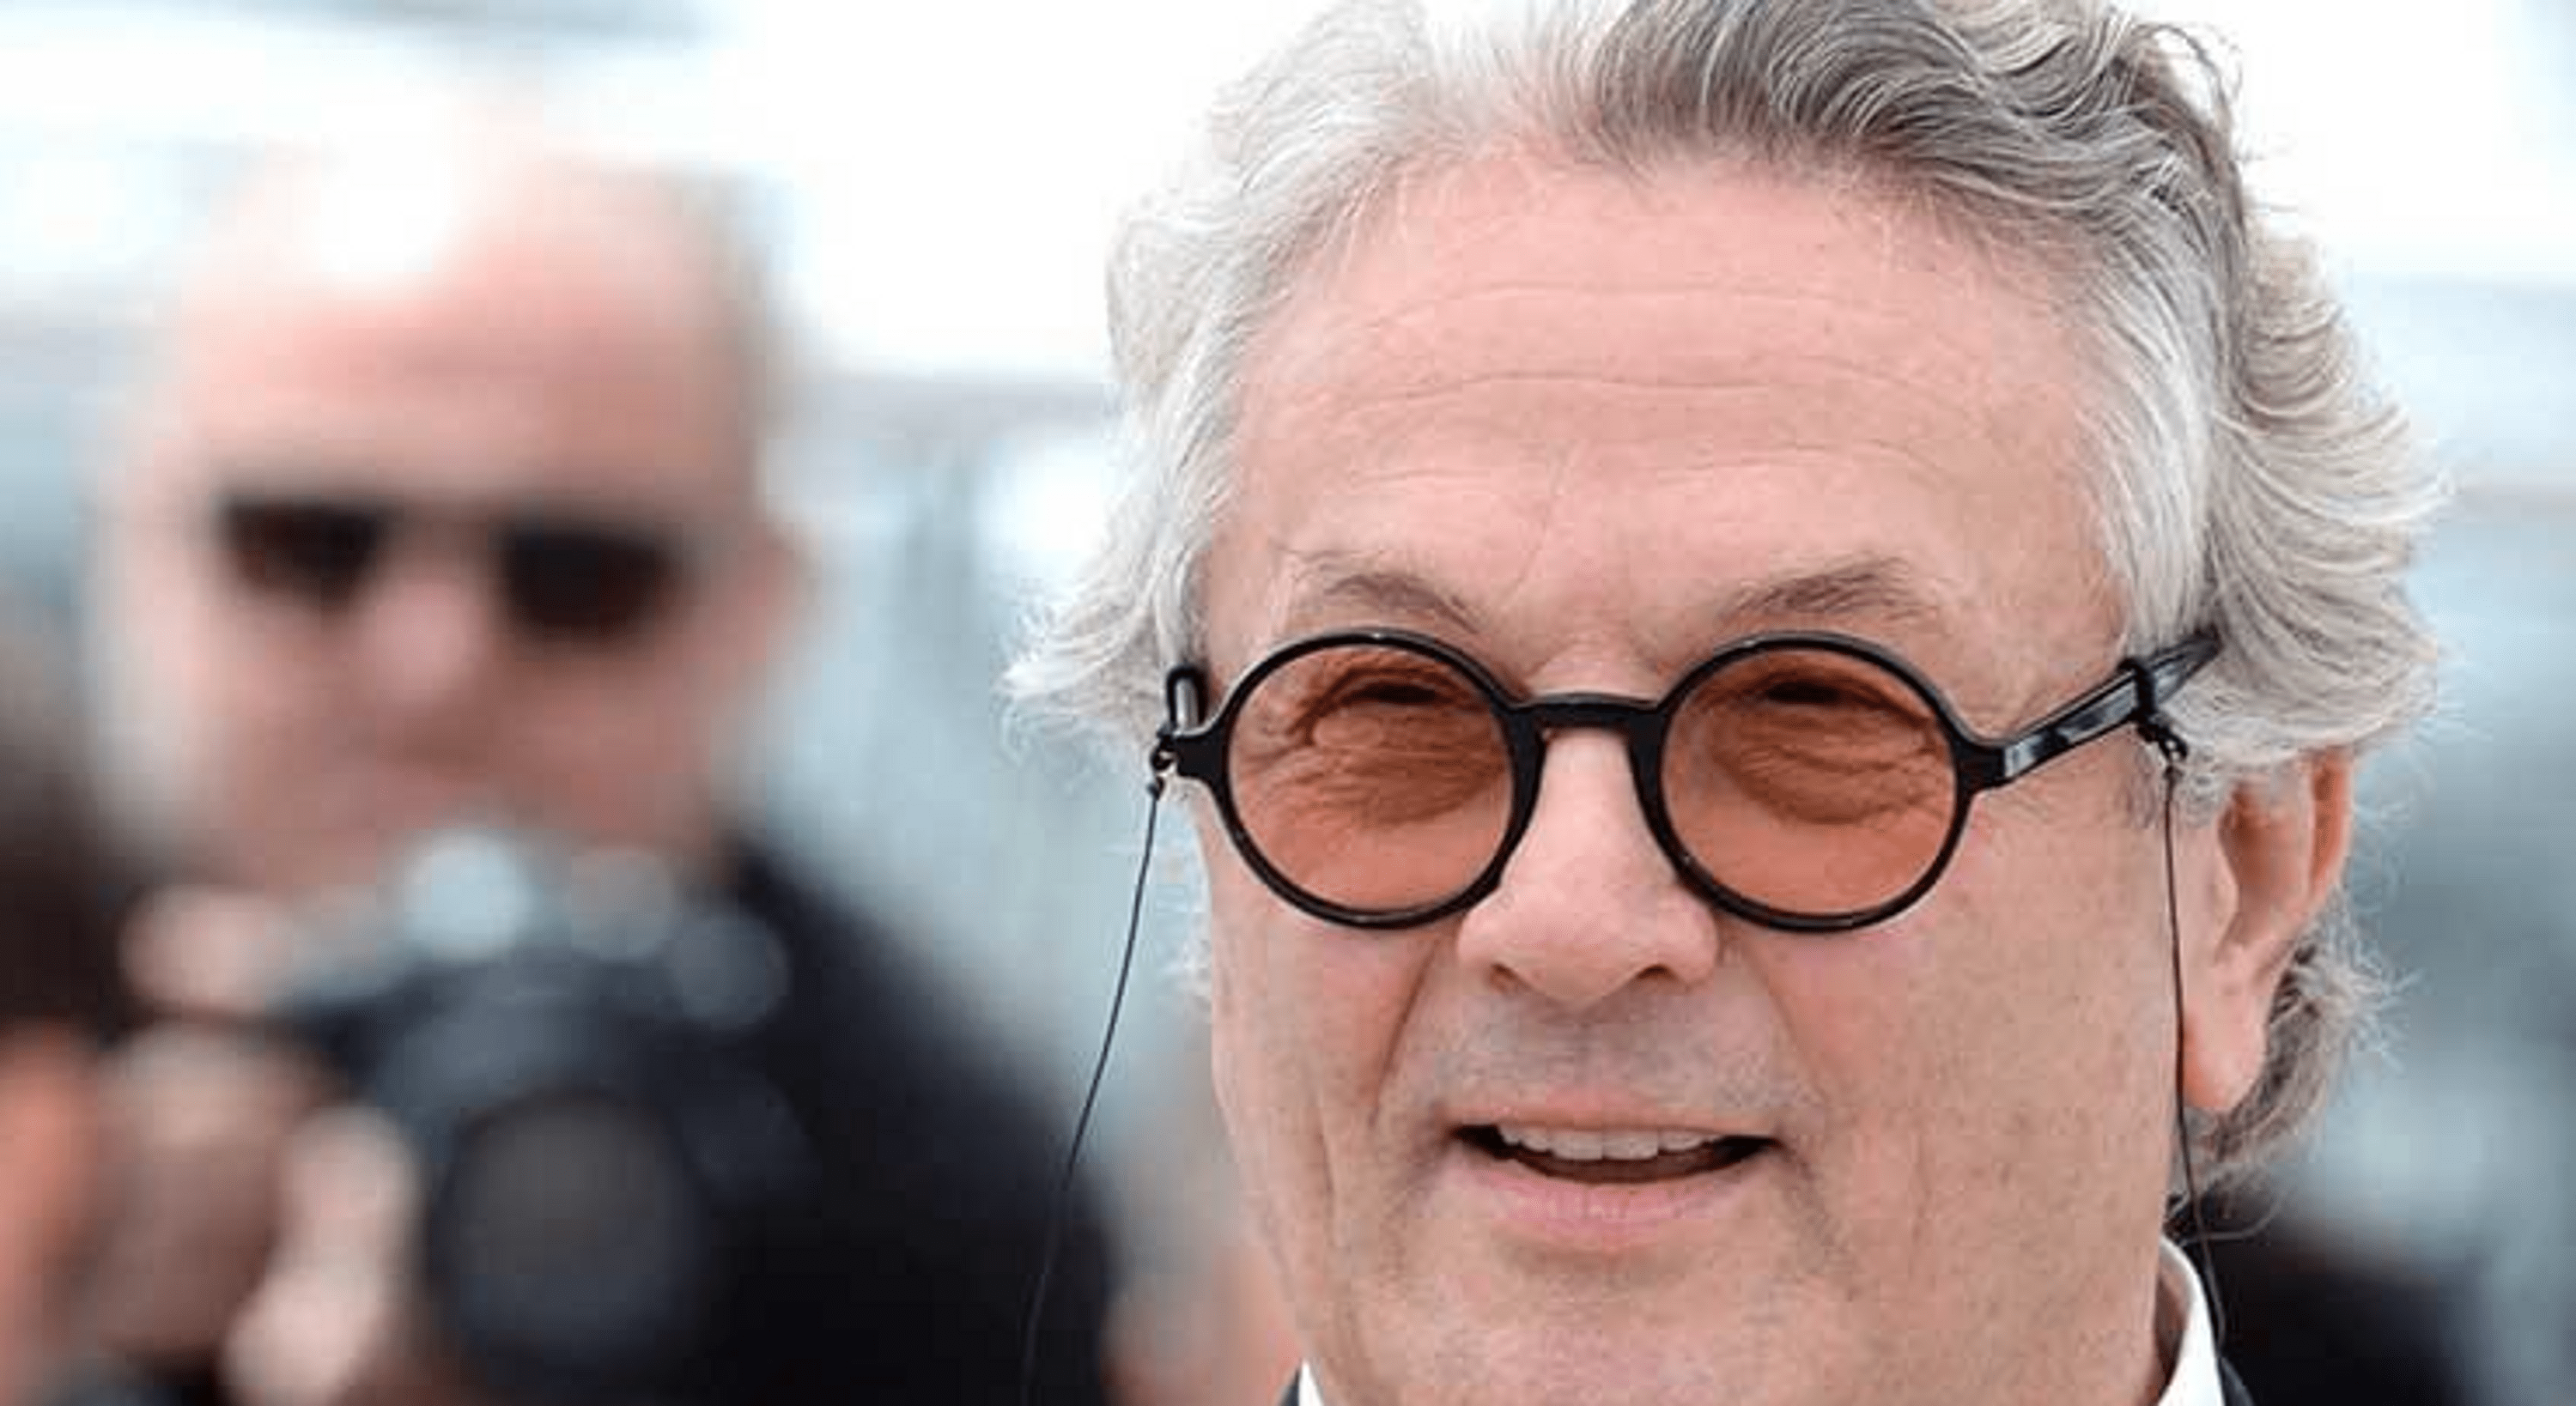 ”the-new-film-by-the-author-george-miller-of-mad-max-was-greeted-with-a-6-minute-standing-ovation-in-cannes”